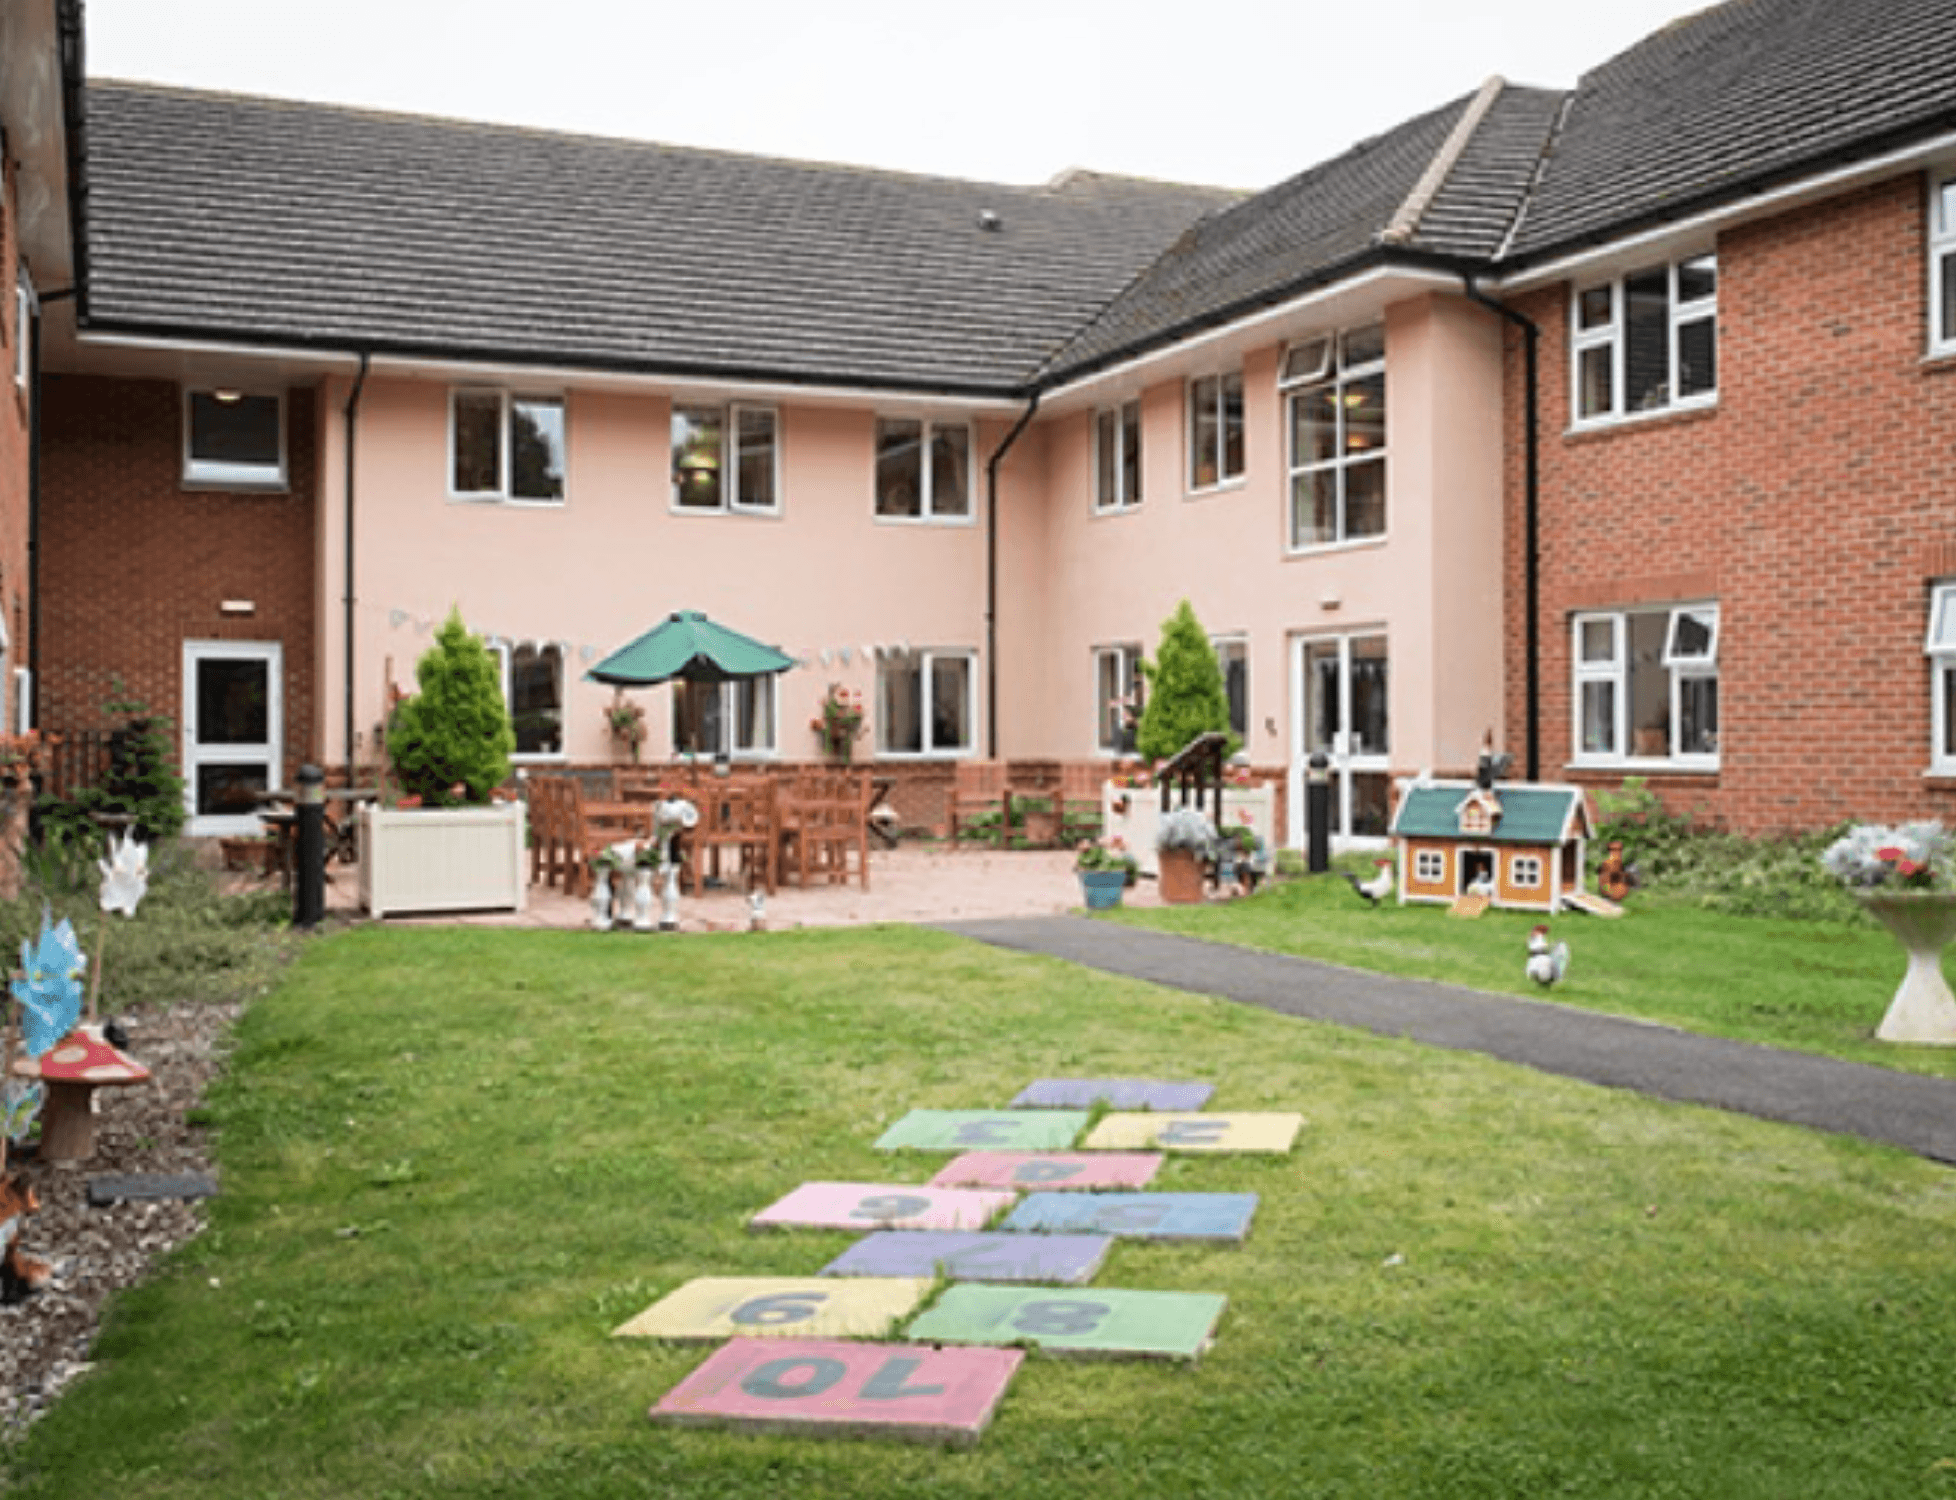 The Fremantle Trust - Icknield Court care home 003